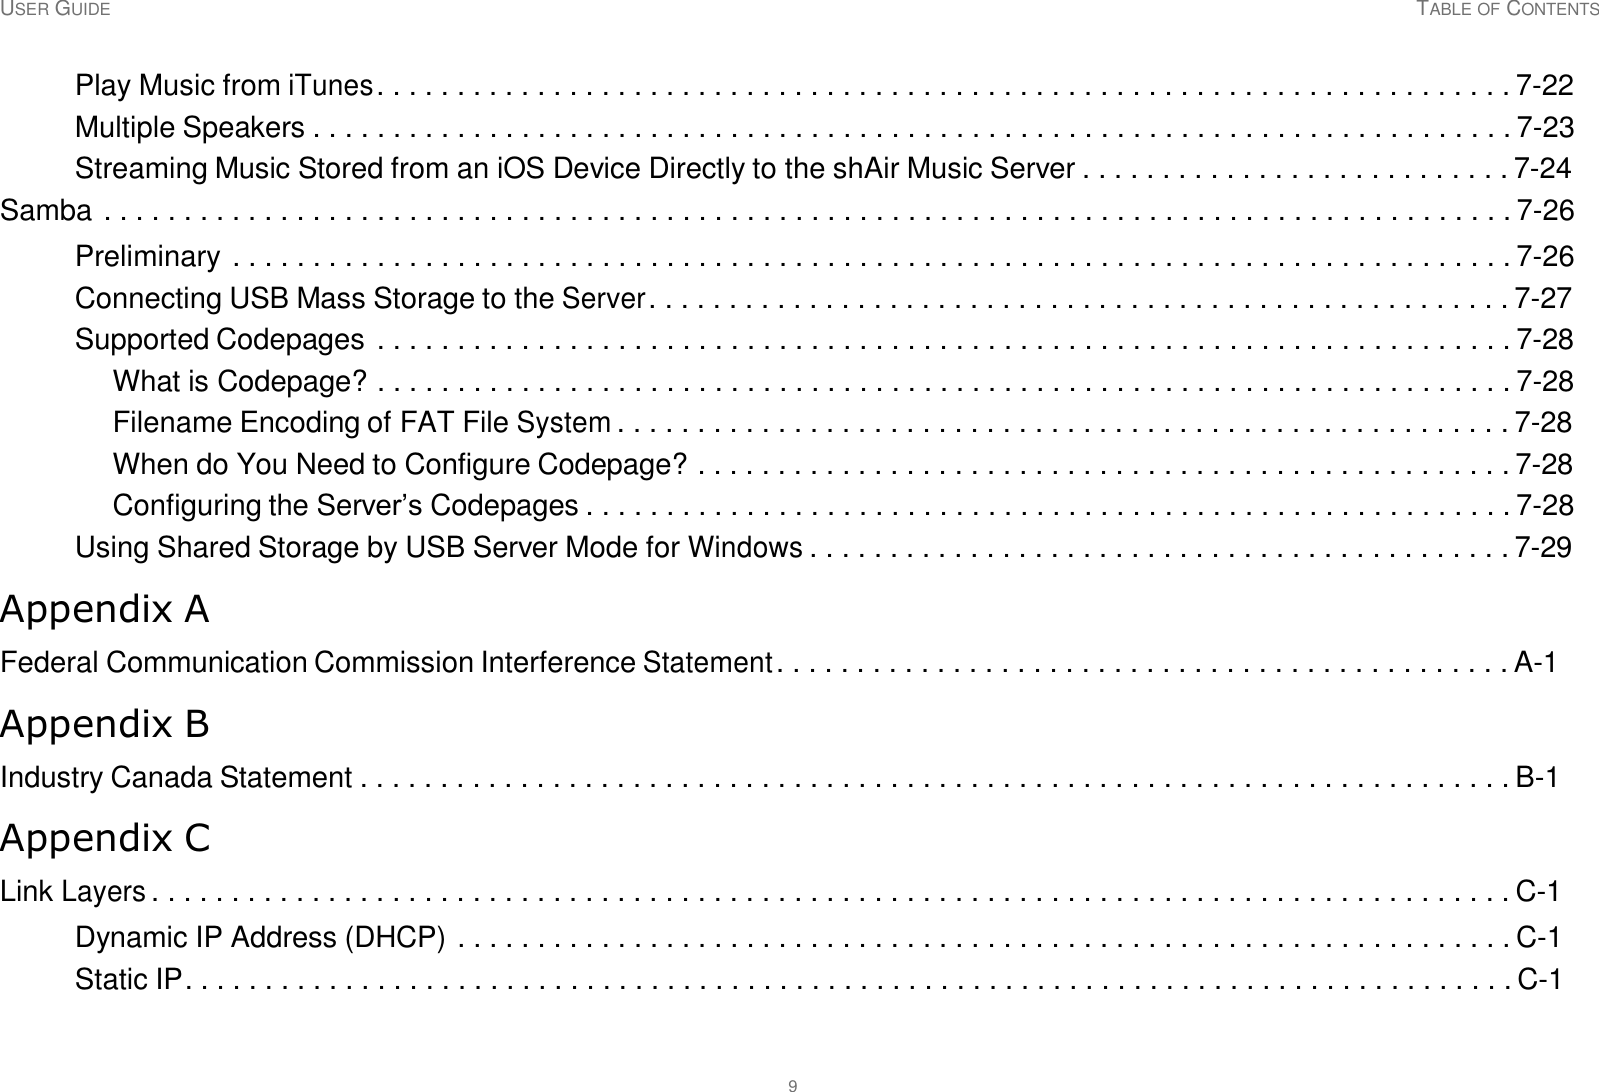 USER GUIDE TABLE OF CONTENTS 9     Play Music from iTunes . . . . . . . . . . . . . . . . . . . . . . . . . . . . . . . . . . . . . . . . . . . . . . . . . . . . . . . . . . . . . . . . . . . . . . . 7-22 Multiple Speakers . . . . . . . . . . . . . . . . . . . . . . . . . . . . . . . . . . . . . . . . . . . . . . . . . . . . . . . . . . . . . . . . . . . . . . . . . . . 7-23 Streaming Music Stored from an iOS Device Directly to the shAir Music Server . . . . . . . . . . . . . . . . . . . . . . . . . . . 7-24 Samba . . . . . . . . . . . . . . . . . . . . . . . . . . . . . . . . . . . . . . . . . . . . . . . . . . . . . . . . . . . . . . . . . . . . . . . . . . . . . . . . . . . . . . . . 7-26  Preliminary . . . . . . . . . . . . . . . . . . . . . . . . . . . . . . . . . . . . . . . . . . . . . . . . . . . . . . . . . . . . . . . . . . . . . . . . . . . . . . . . 7-26 Connecting USB Mass Storage to the Server . . . . . . . . . . . . . . . . . . . . . . . . . . . . . . . . . . . . . . . . . . . . . . . . . . . . . . 7-27 Supported Codepages . . . . . . . . . . . . . . . . . . . . . . . . . . . . . . . . . . . . . . . . . . . . . . . . . . . . . . . . . . . . . . . . . . . . . . . 7-28 What is Codepage? . . . . . . . . . . . . . . . . . . . . . . . . . . . . . . . . . . . . . . . . . . . . . . . . . . . . . . . . . . . . . . . . . . . . . . . 7-28 Filename Encoding of FAT File System . . . . . . . . . . . . . . . . . . . . . . . . . . . . . . . . . . . . . . . . . . . . . . . . . . . . . . . . 7-28 When do You Need to Configure Codepage? . . . . . . . . . . . . . . . . . . . . . . . . . . . . . . . . . . . . . . . . . . . . . . . . . . . 7-28 Configuring the Server’s Codepages . . . . . . . . . . . . . . . . . . . . . . . . . . . . . . . . . . . . . . . . . . . . . . . . . . . . . . . . . . 7-28 Using Shared Storage by USB Server Mode for Windows . . . . . . . . . . . . . . . . . . . . . . . . . . . . . . . . . . . . . . . . . . . . 7-29  Appendix A  Federal Communication Commission Interference Statement . . . . . . . . . . . . . . . . . . . . . . . . . . . . . . . . . . . . . . . . . . . . . . A-1  Appendix B  Industry Canada Statement . . . . . . . . . . . . . . . . . . . . . . . . . . . . . . . . . . . . . . . . . . . . . . . . . . . . . . . . . . . . . . . . . . . . . . . . B-1  Appendix C  Link Layers . . . . . . . . . . . . . . . . . . . . . . . . . . . . . . . . . . . . . . . . . . . . . . . . . . . . . . . . . . . . . . . . . . . . . . . . . . . . . . . . . . . . . C-1  Dynamic IP Address (DHCP) . . . . . . . . . . . . . . . . . . . . . . . . . . . . . . . . . . . . . . . . . . . . . . . . . . . . . . . . . . . . . . . . . . C-1 Static IP. . . . . . . . . . . . . . . . . . . . . . . . . . . . . . . . . . . . . . . . . . . . . . . . . . . . . . . . . . . . . . . . . . . . . . . . . . . . . . . . . . . C-1 